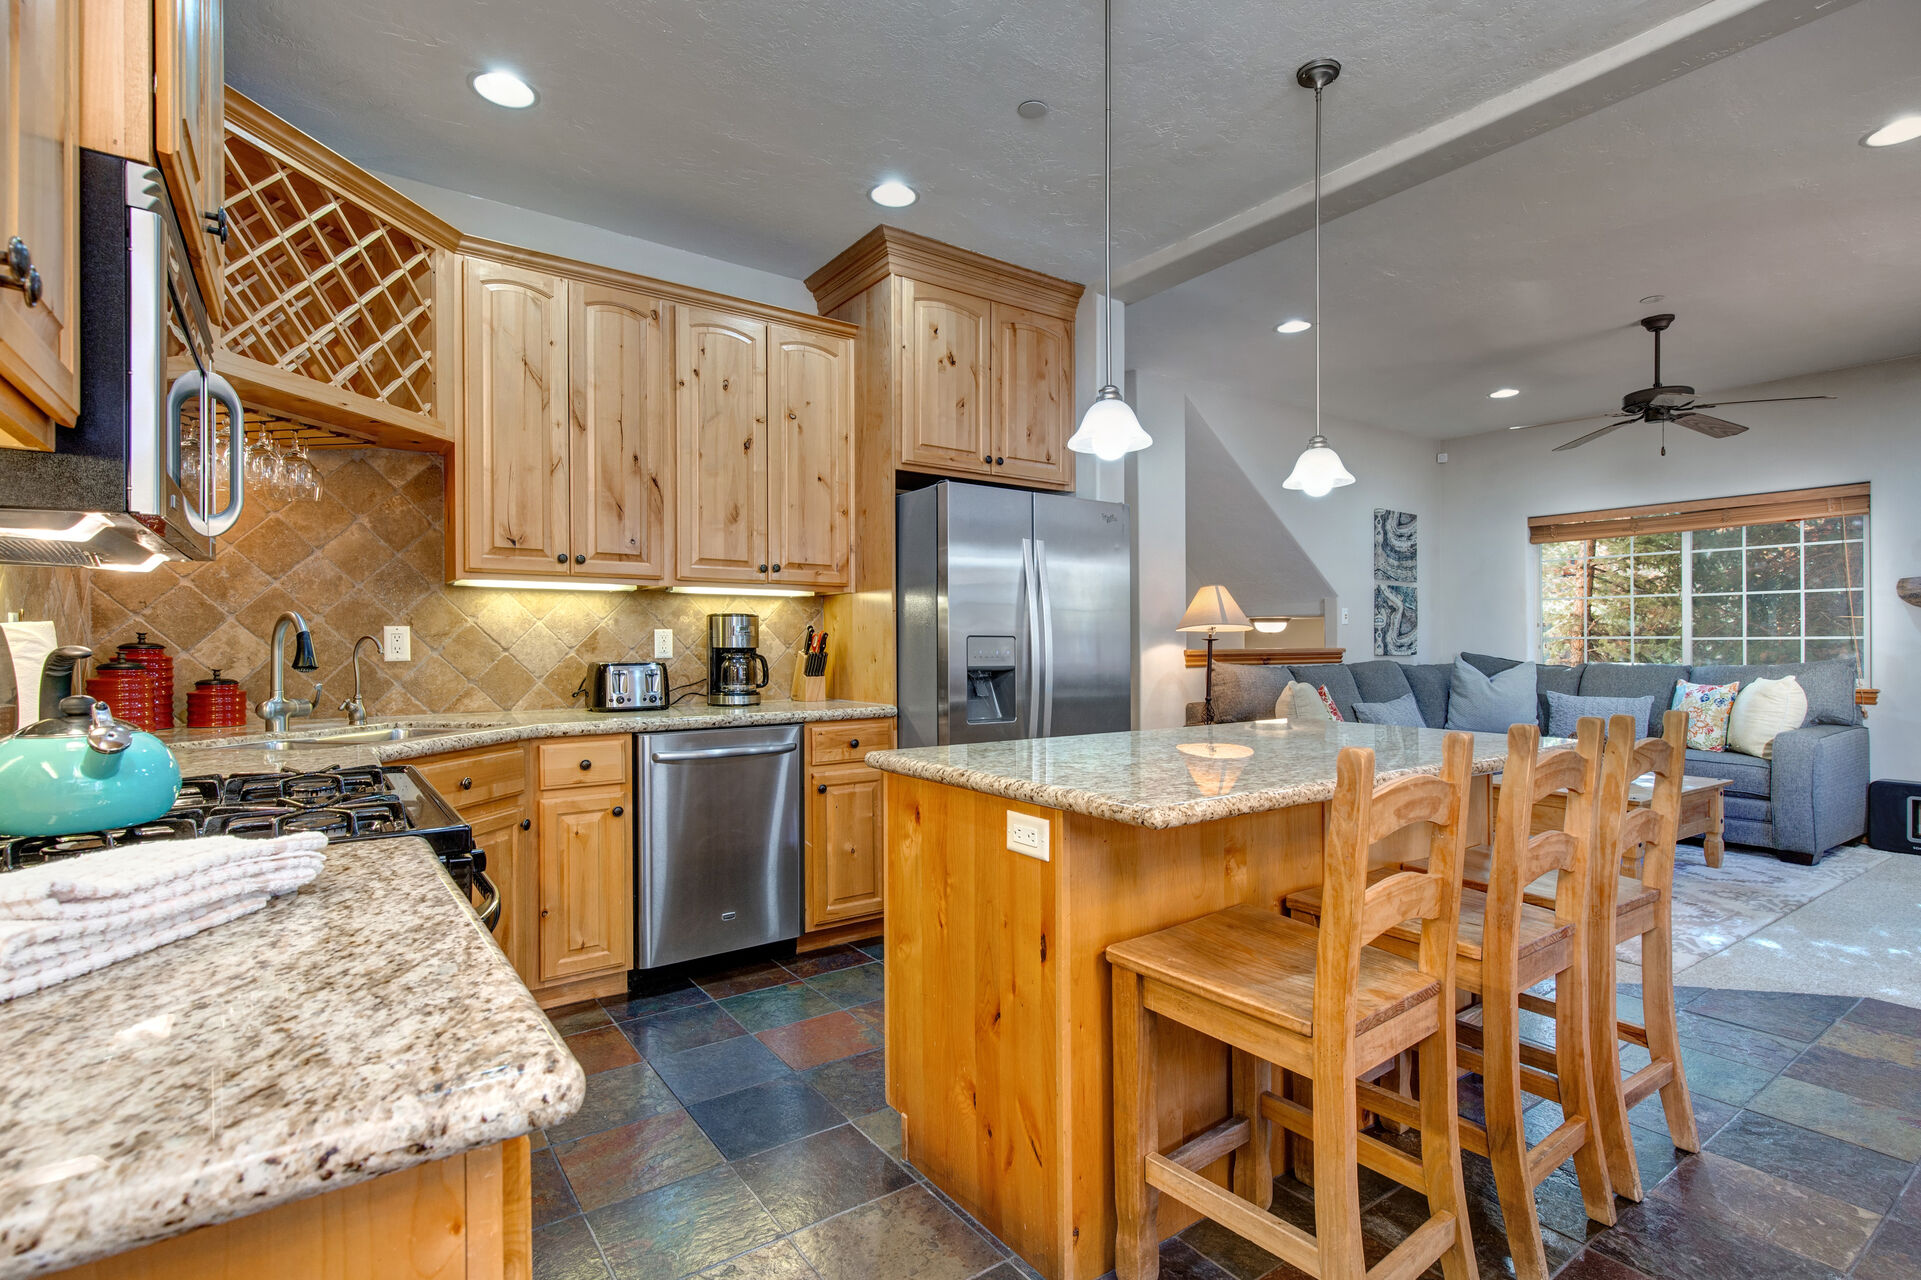 Fully Equipped Kitchen with stone countertops, island seating for three, wine rack, stainless steel appliances, and icee maker